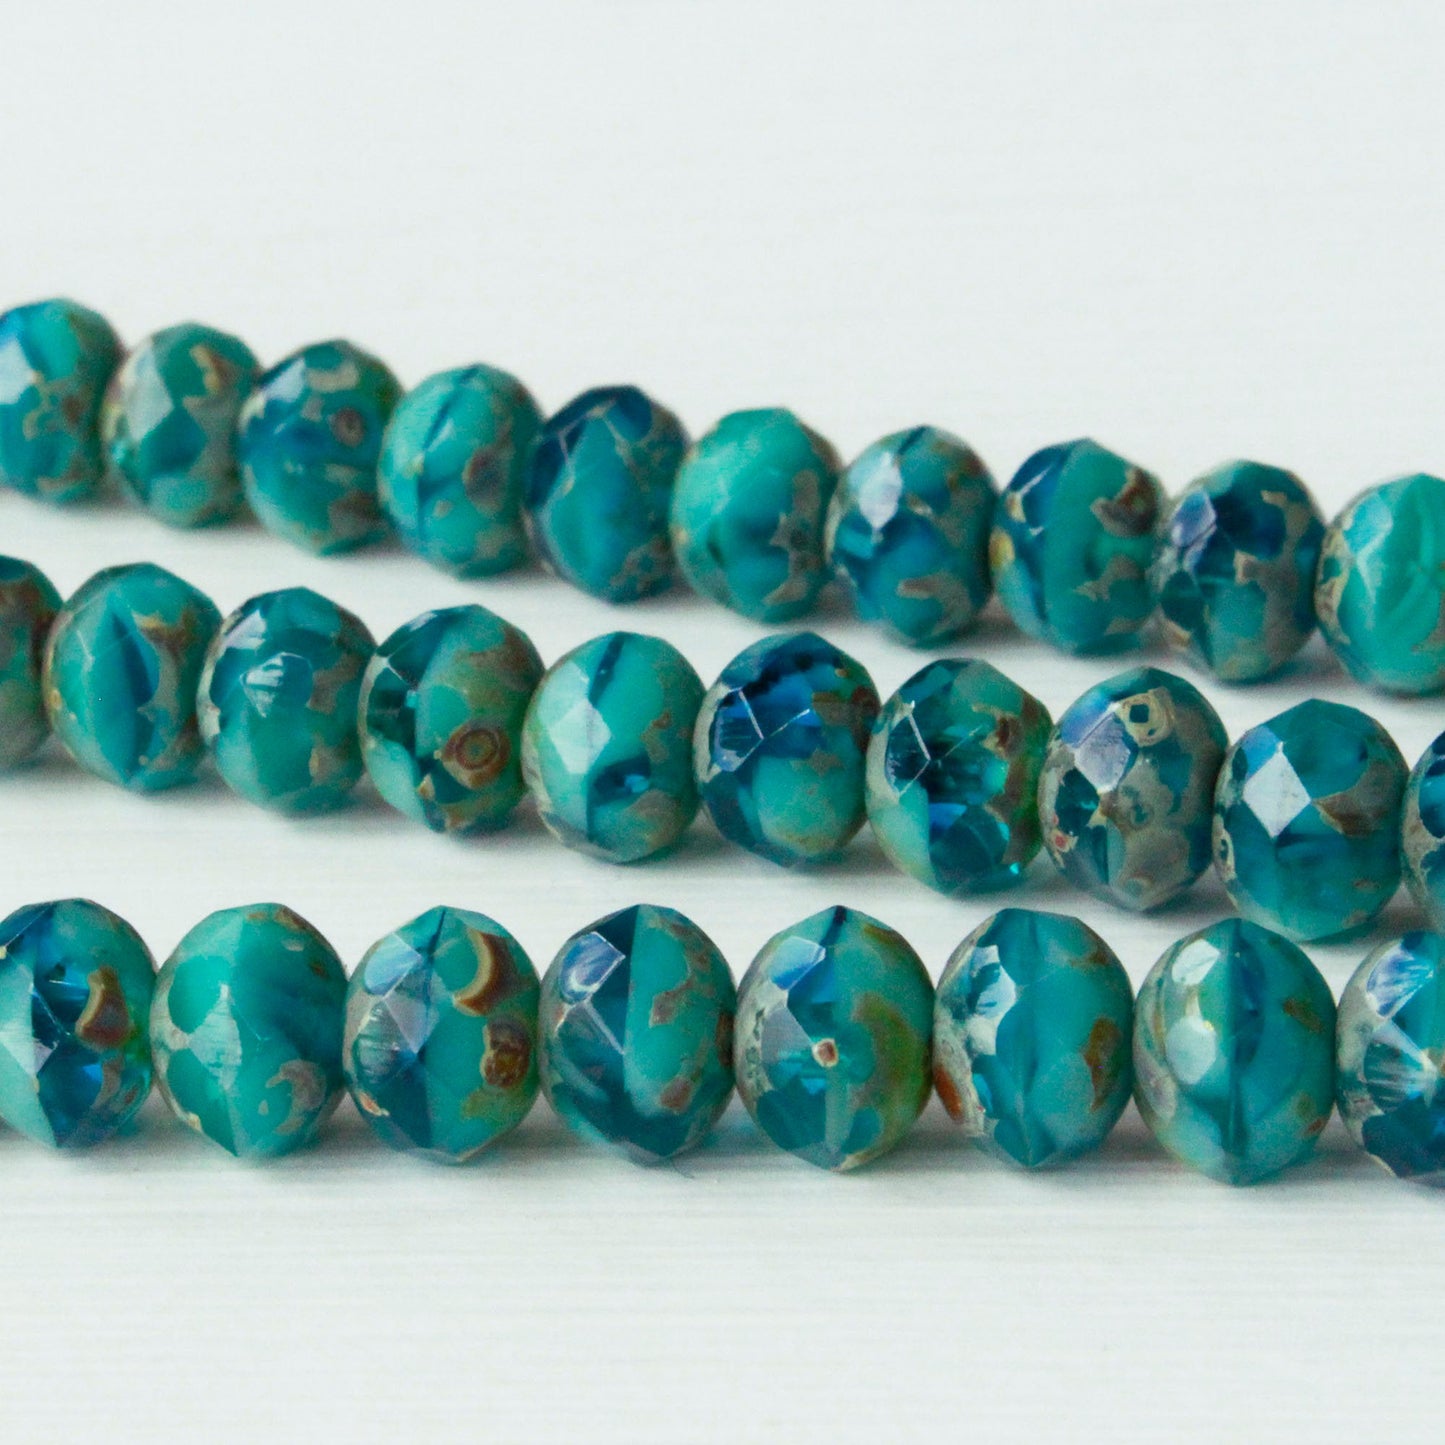 5x7mm Rondelle Beads - Turquoise Blue Mix Picasso -  24 Beads